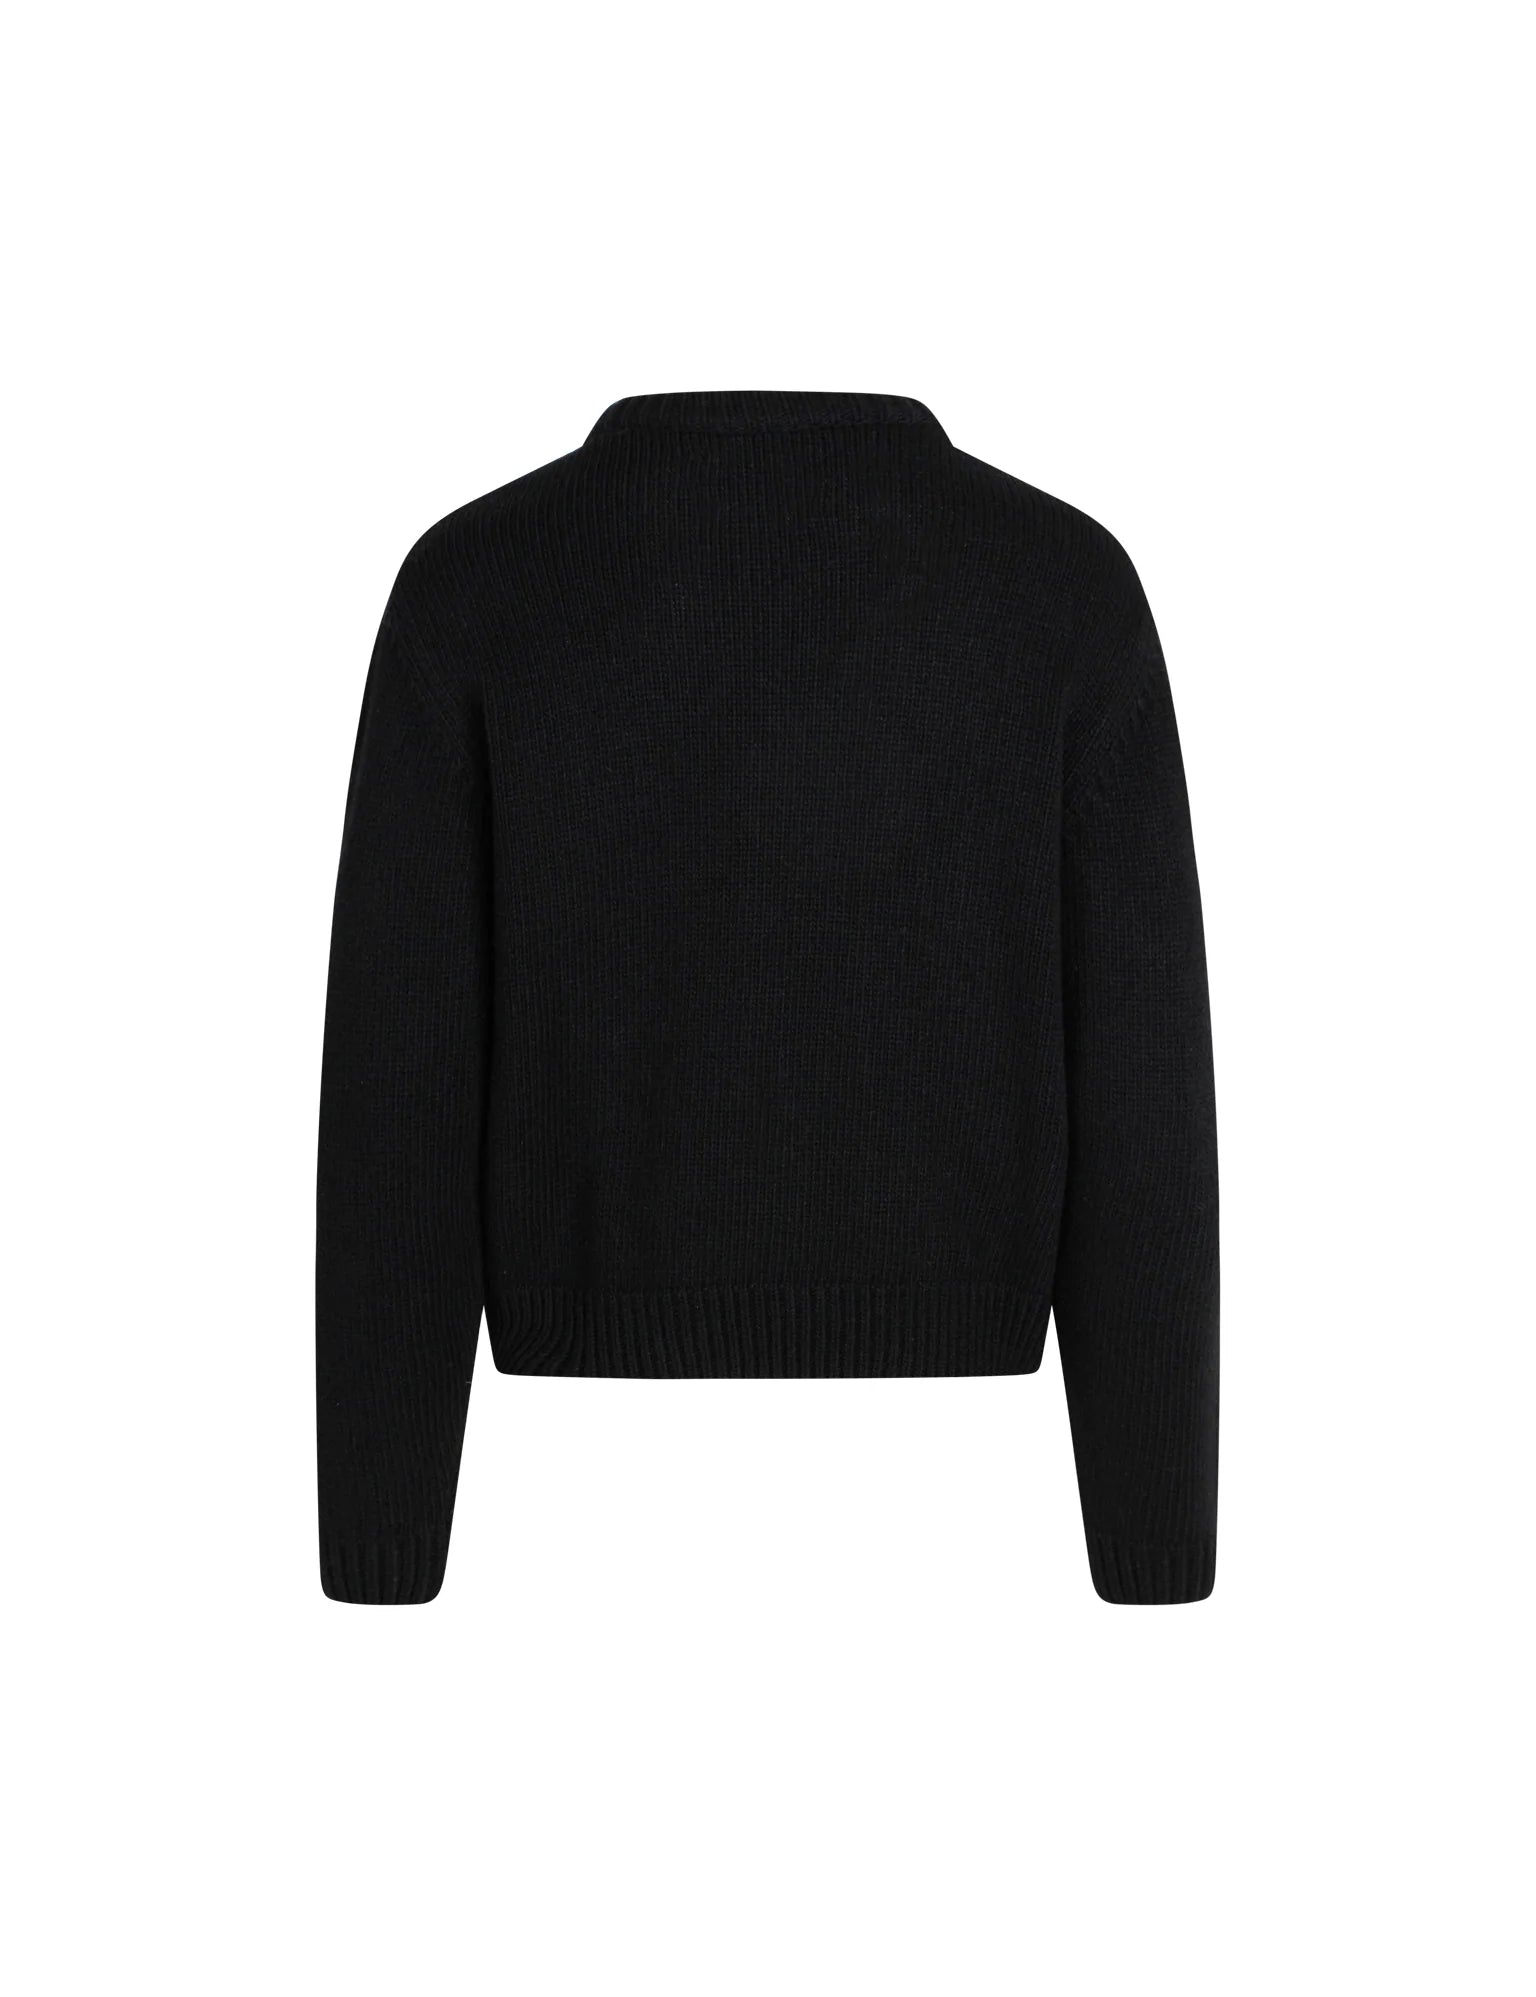 Kaily wool mix sweater in black